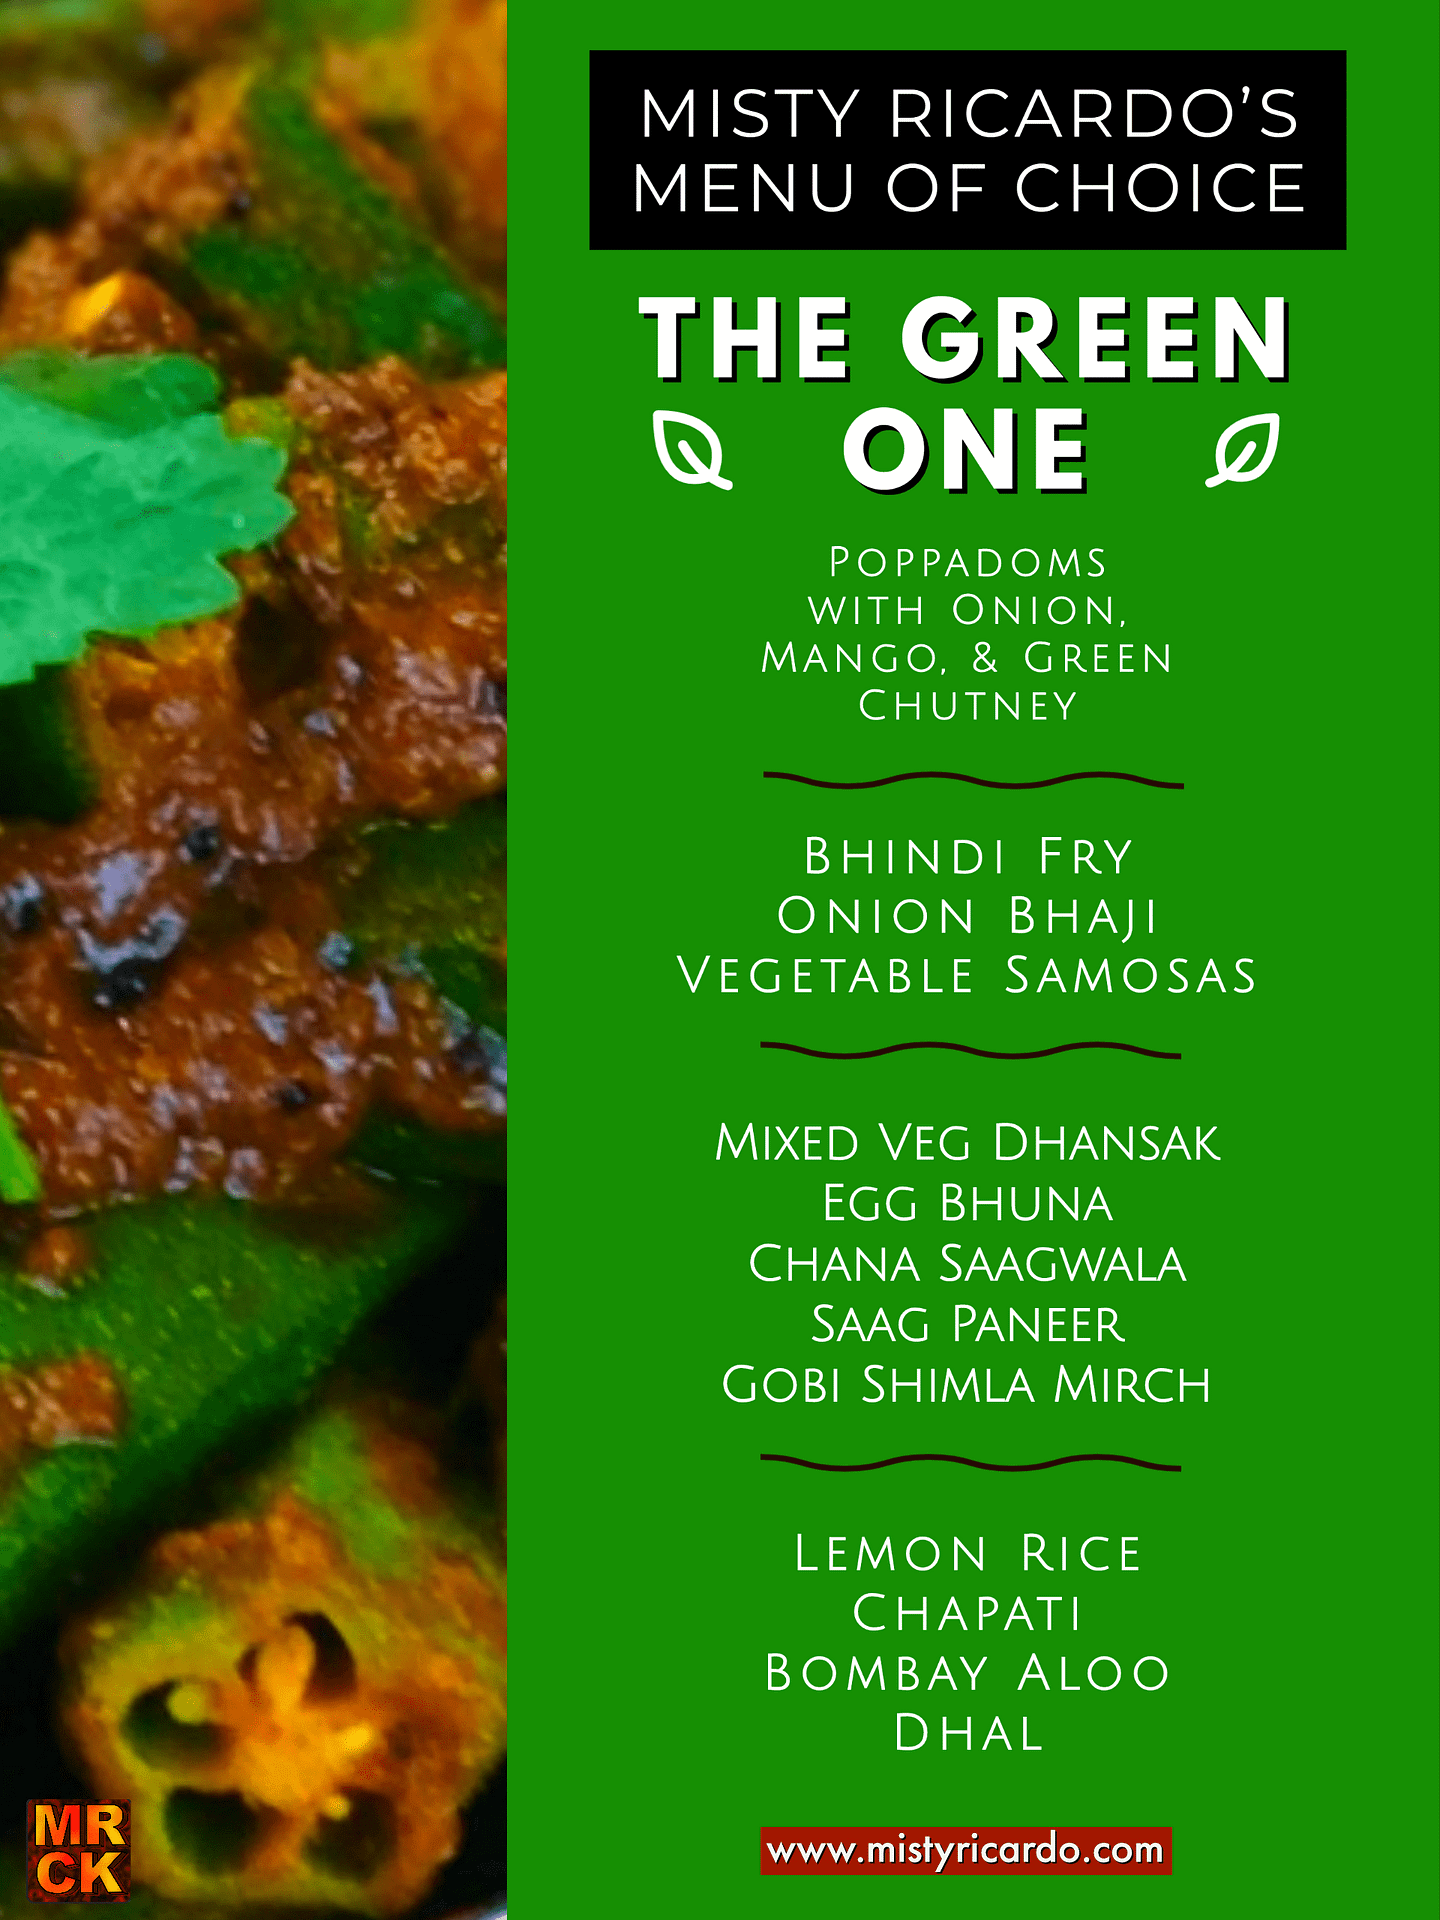 Menu of Choice D: THE GREEN ONE